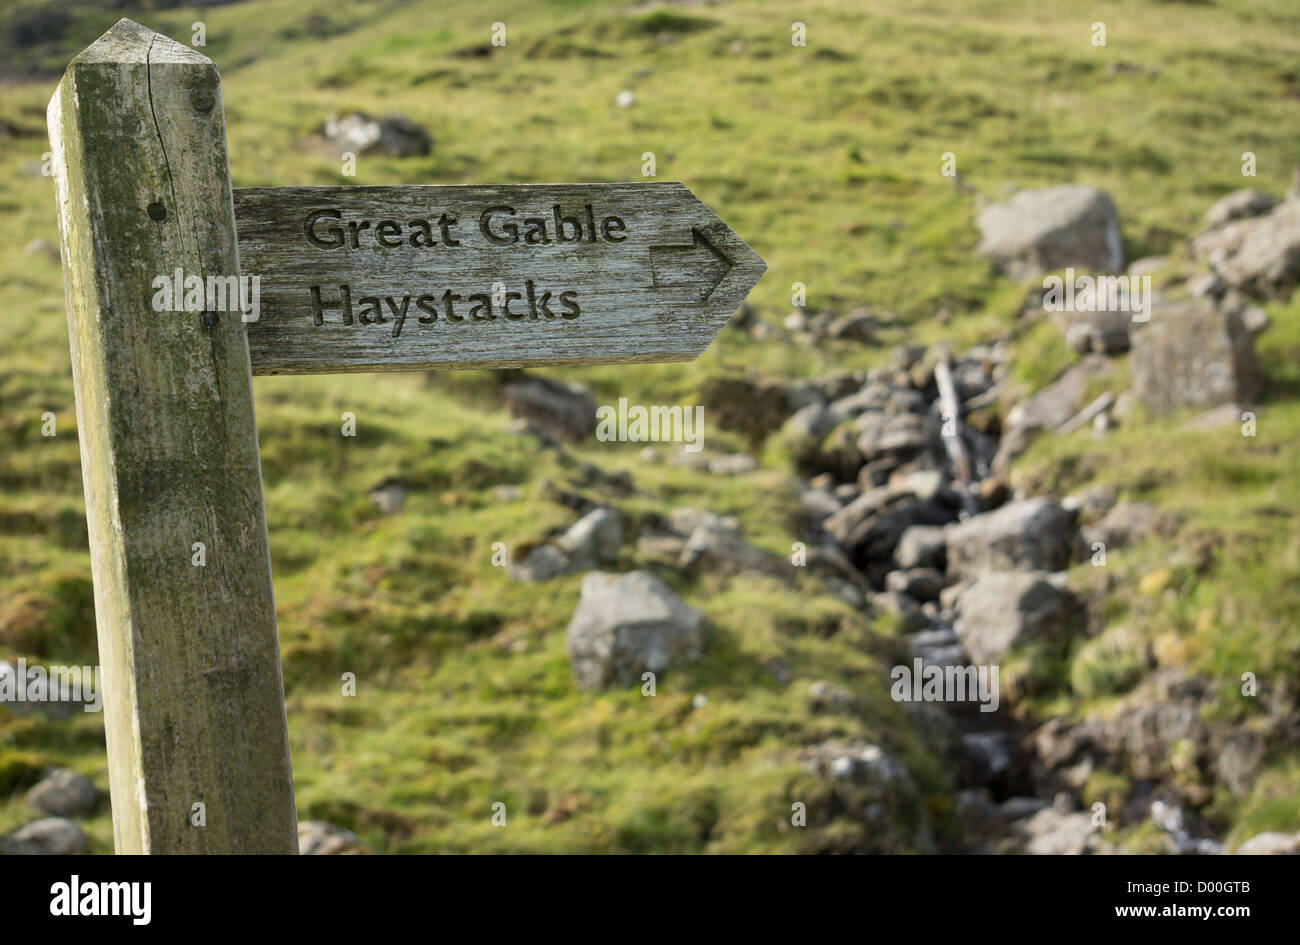 An old wooden signpost pointing the way towards Great Gable and Haystacks in the Lake District. Stock Photo